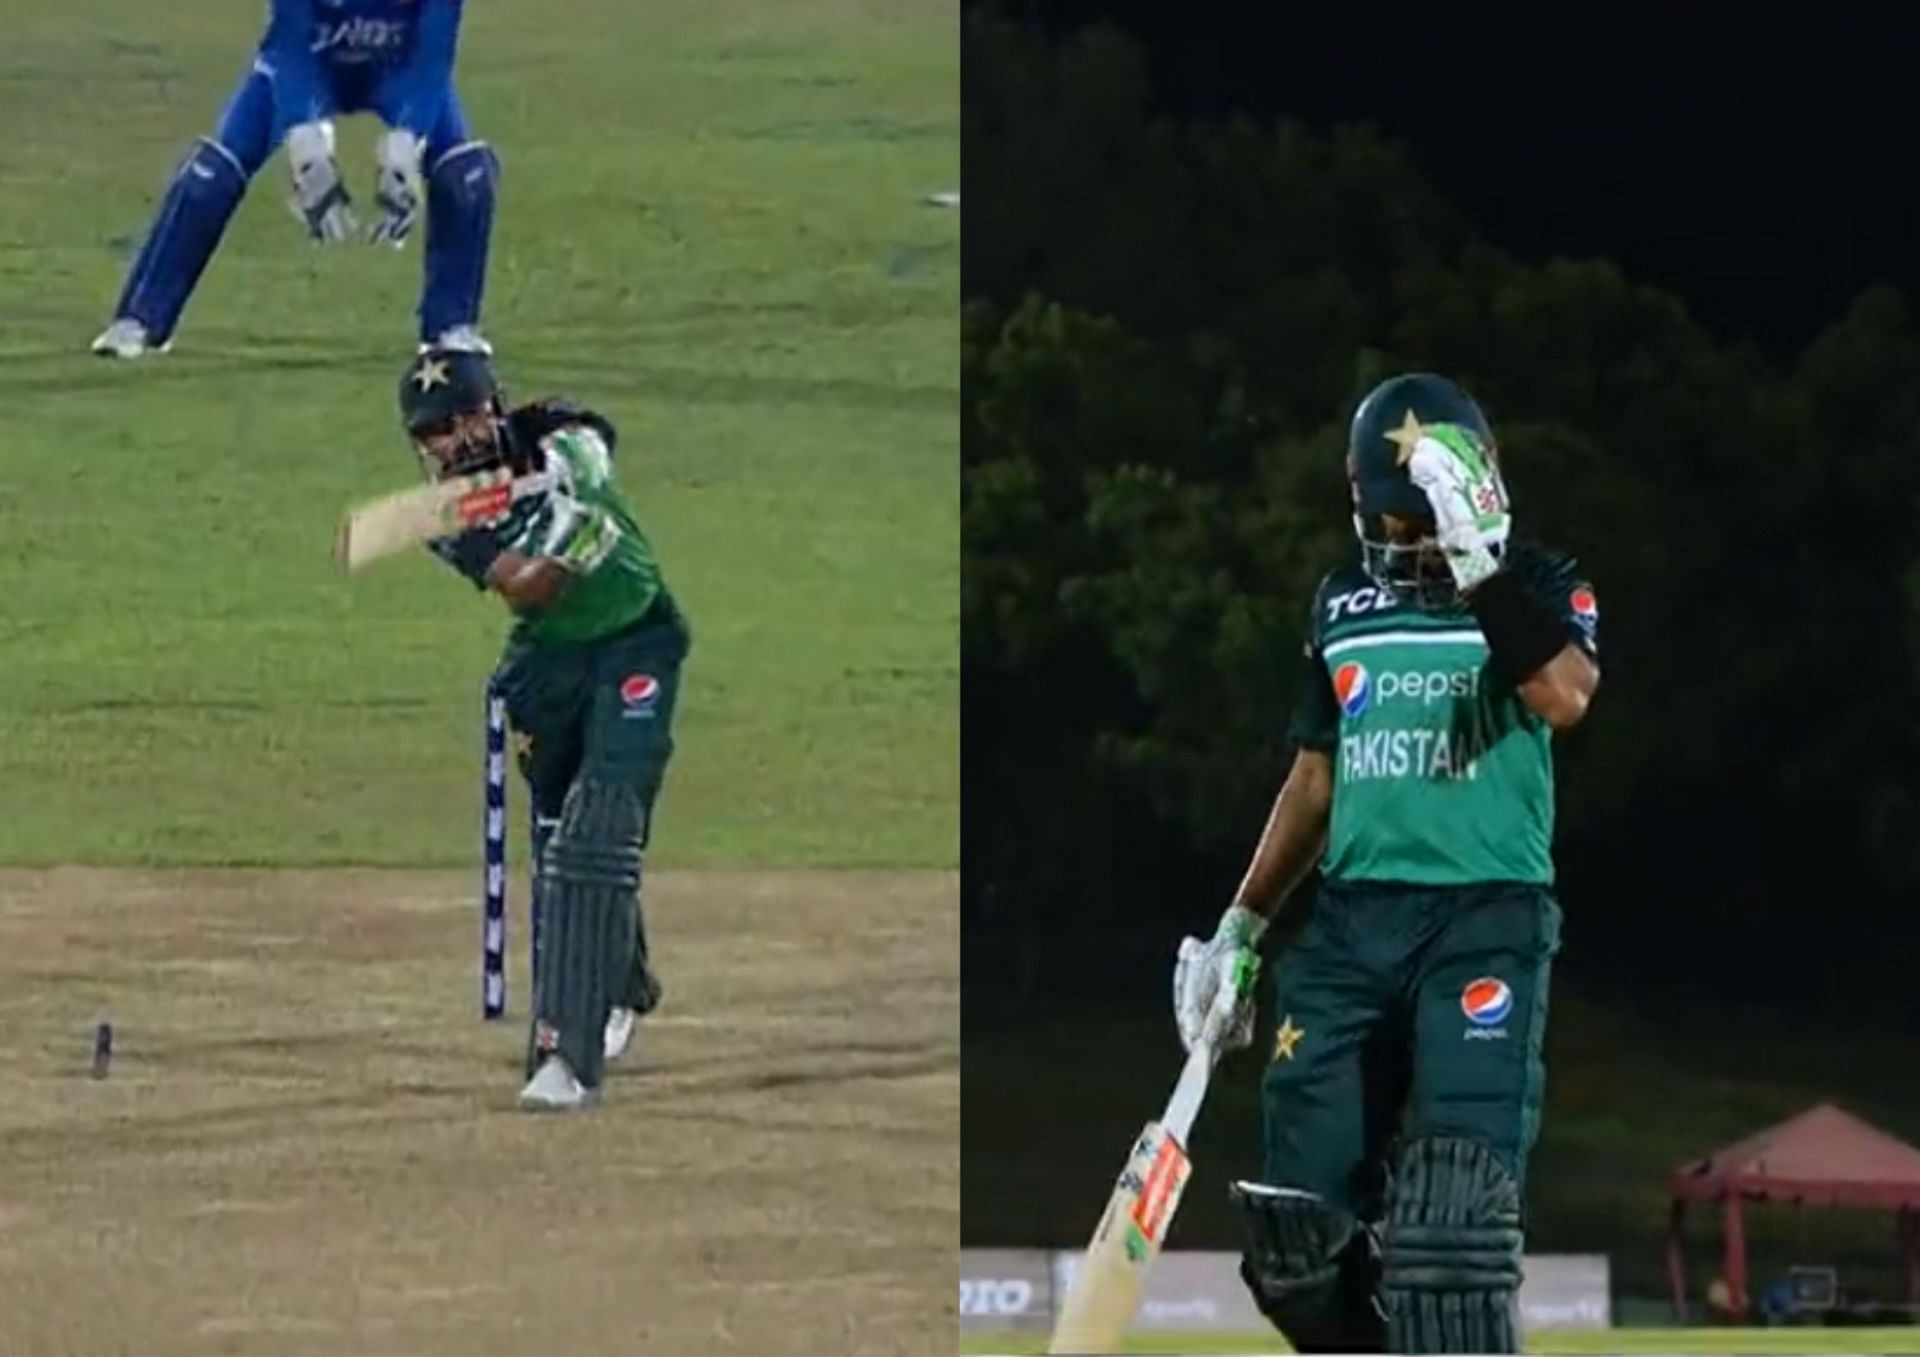 [Watch] Pakistan skipper Babar Azam falls prey to soft dismissal after a solid 53 in 2nd ODI vs Afghanistan